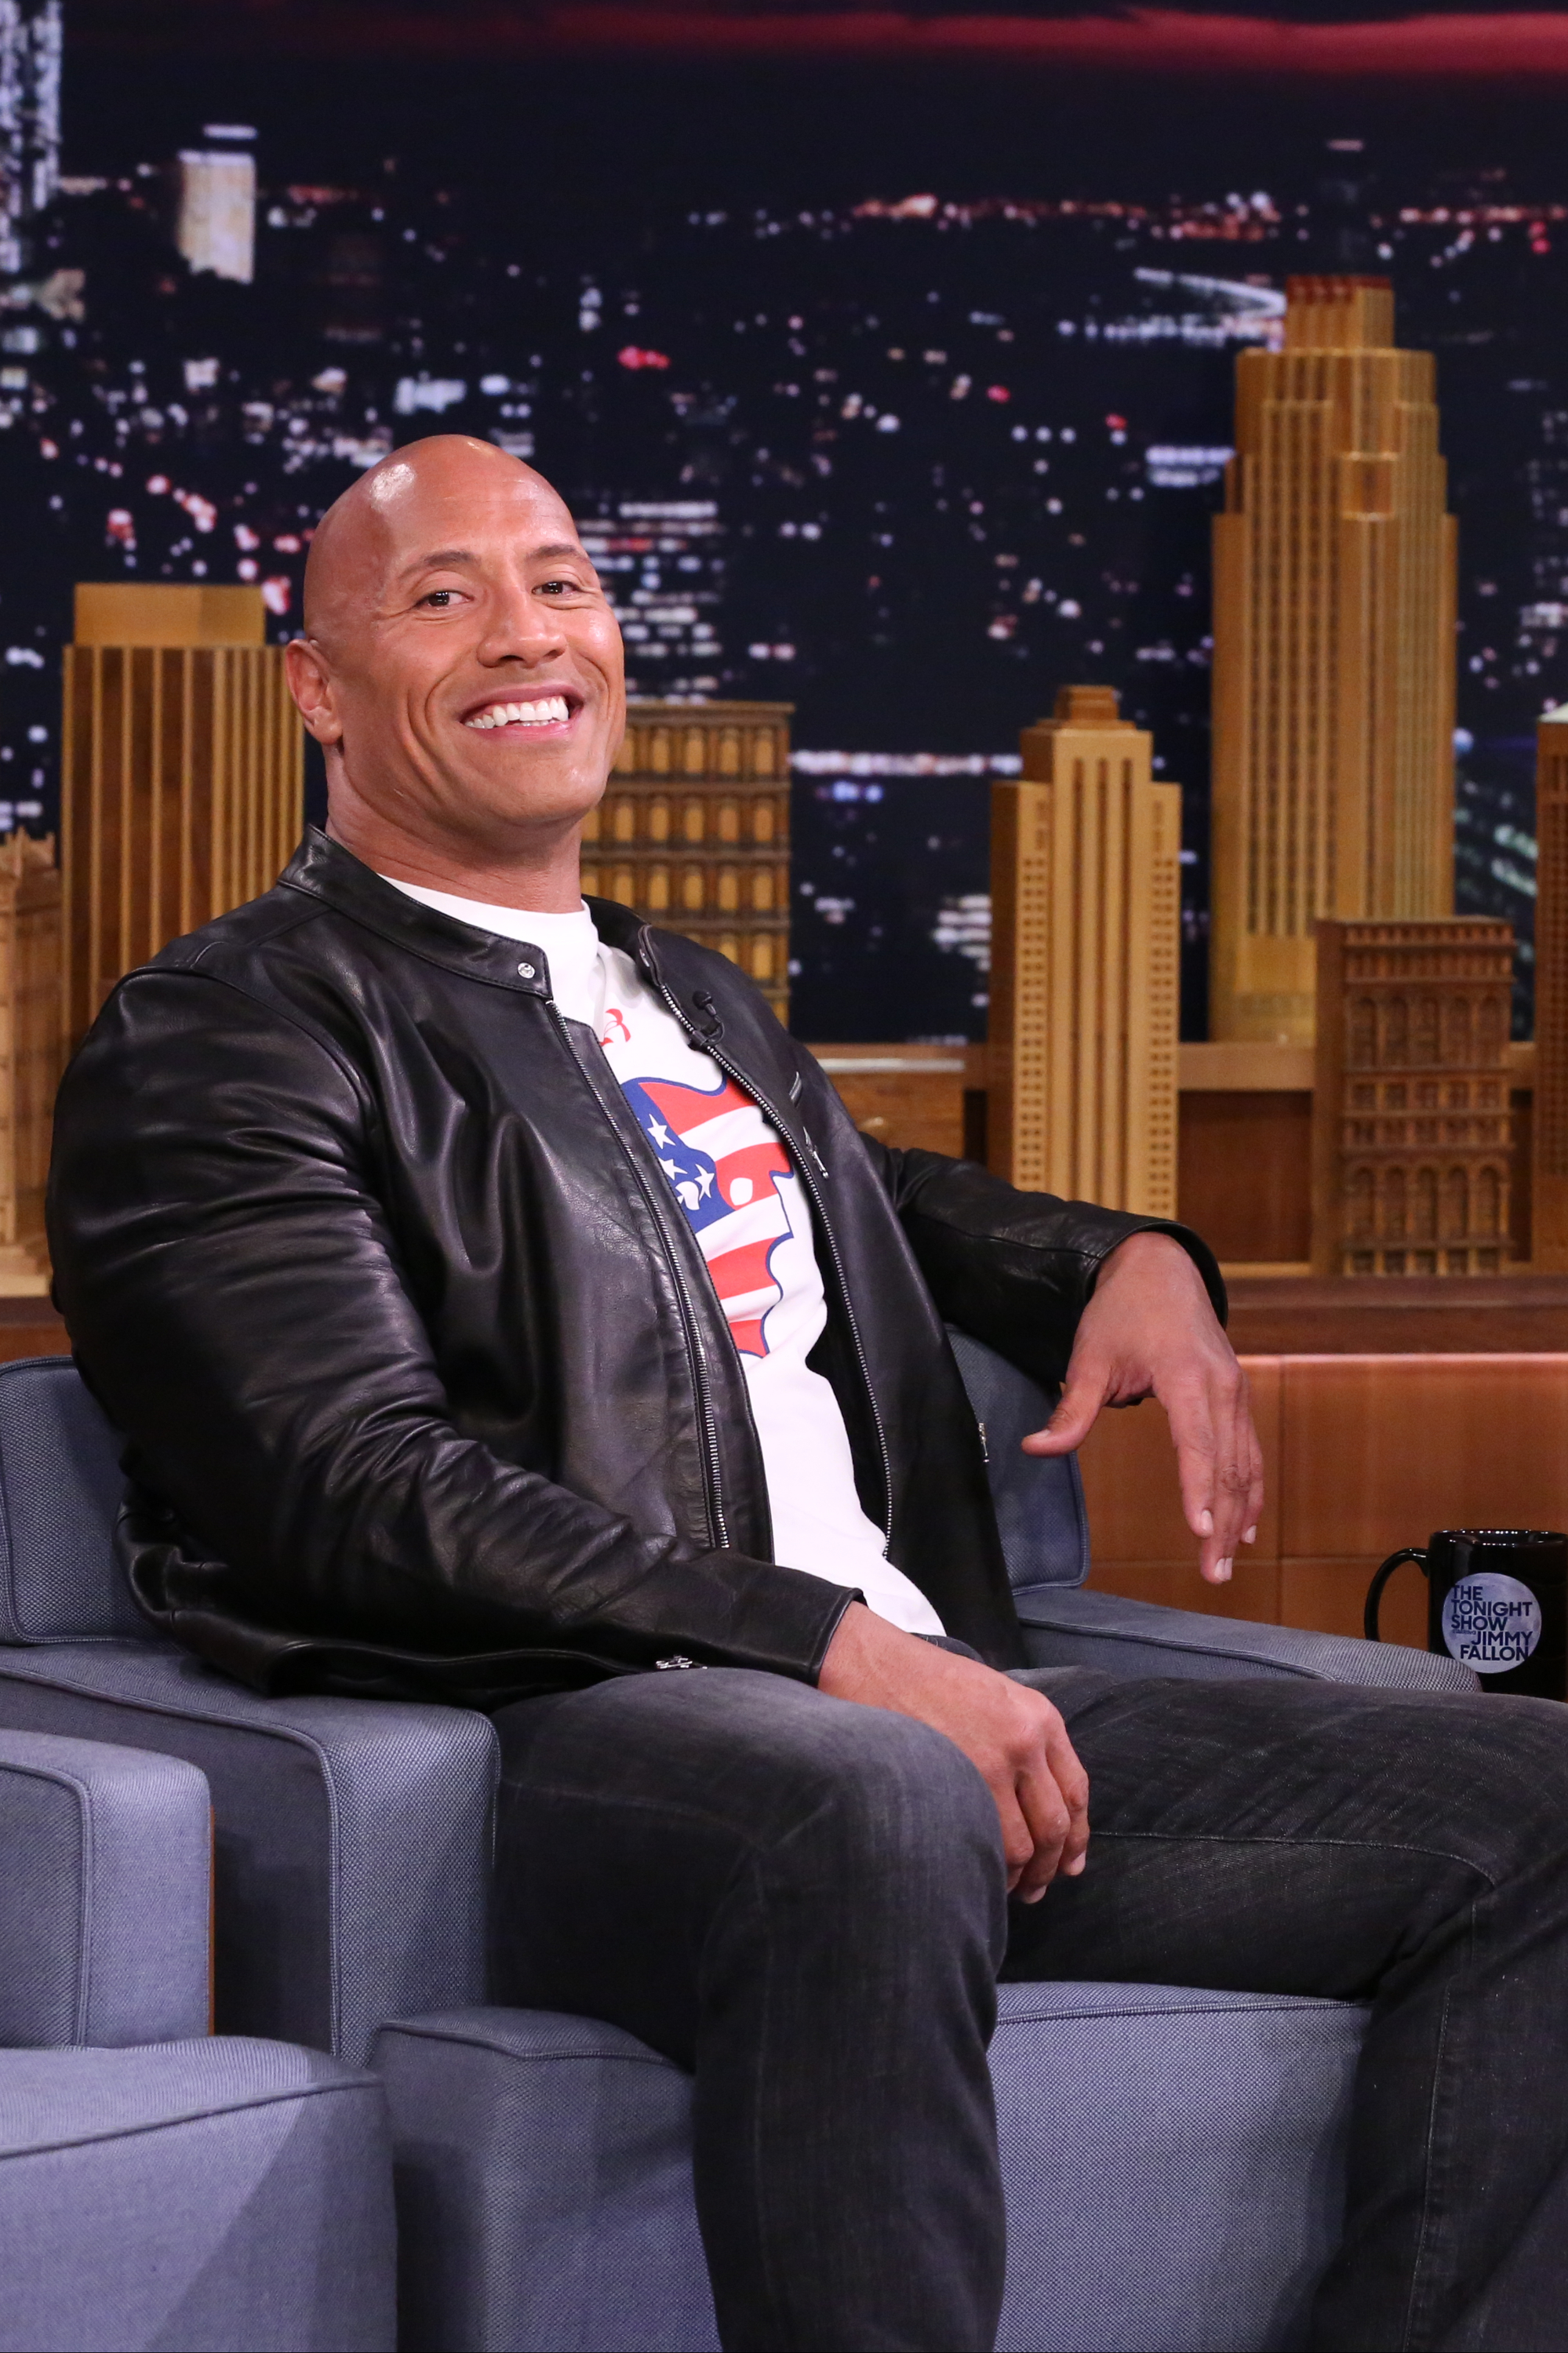 The Rock And Stephen Colbert Have An Eyebrow Showdown (Video), The Rock  Comments On Twitter - Wrestlezone